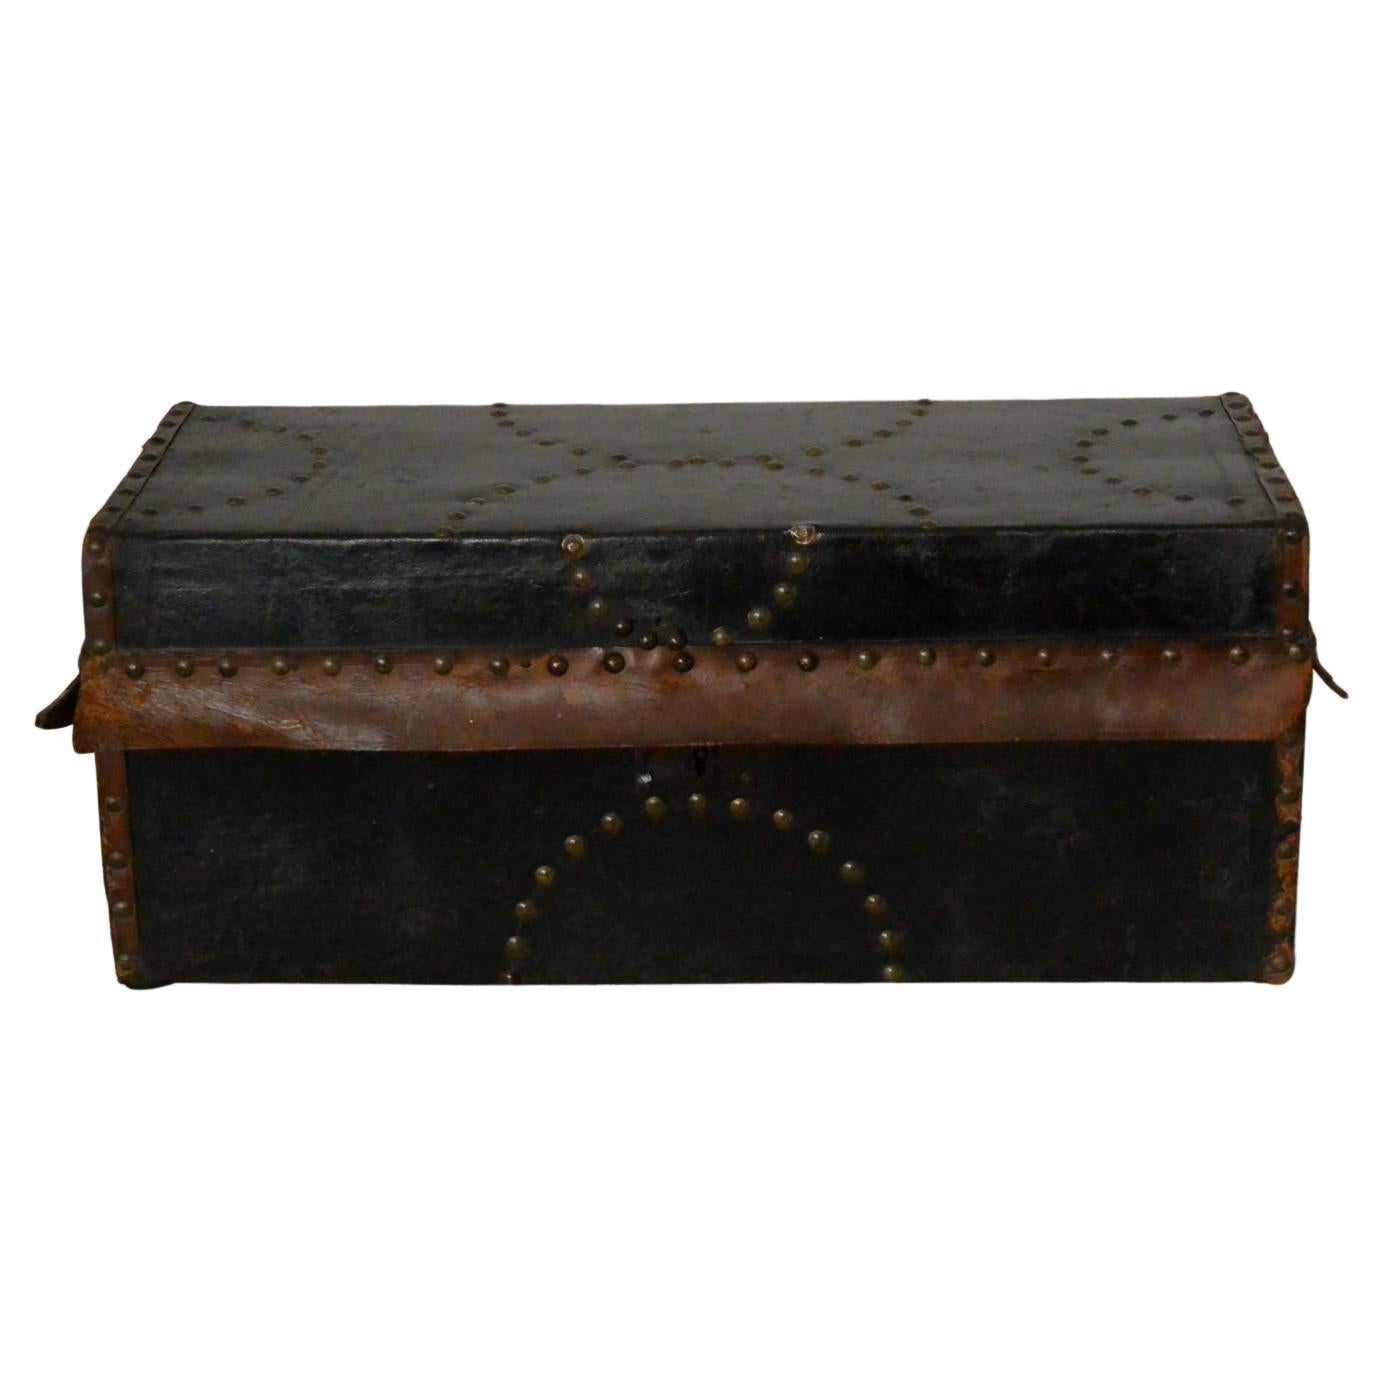 American Federal Child's Trunk Leather Covered with Brass Tacks